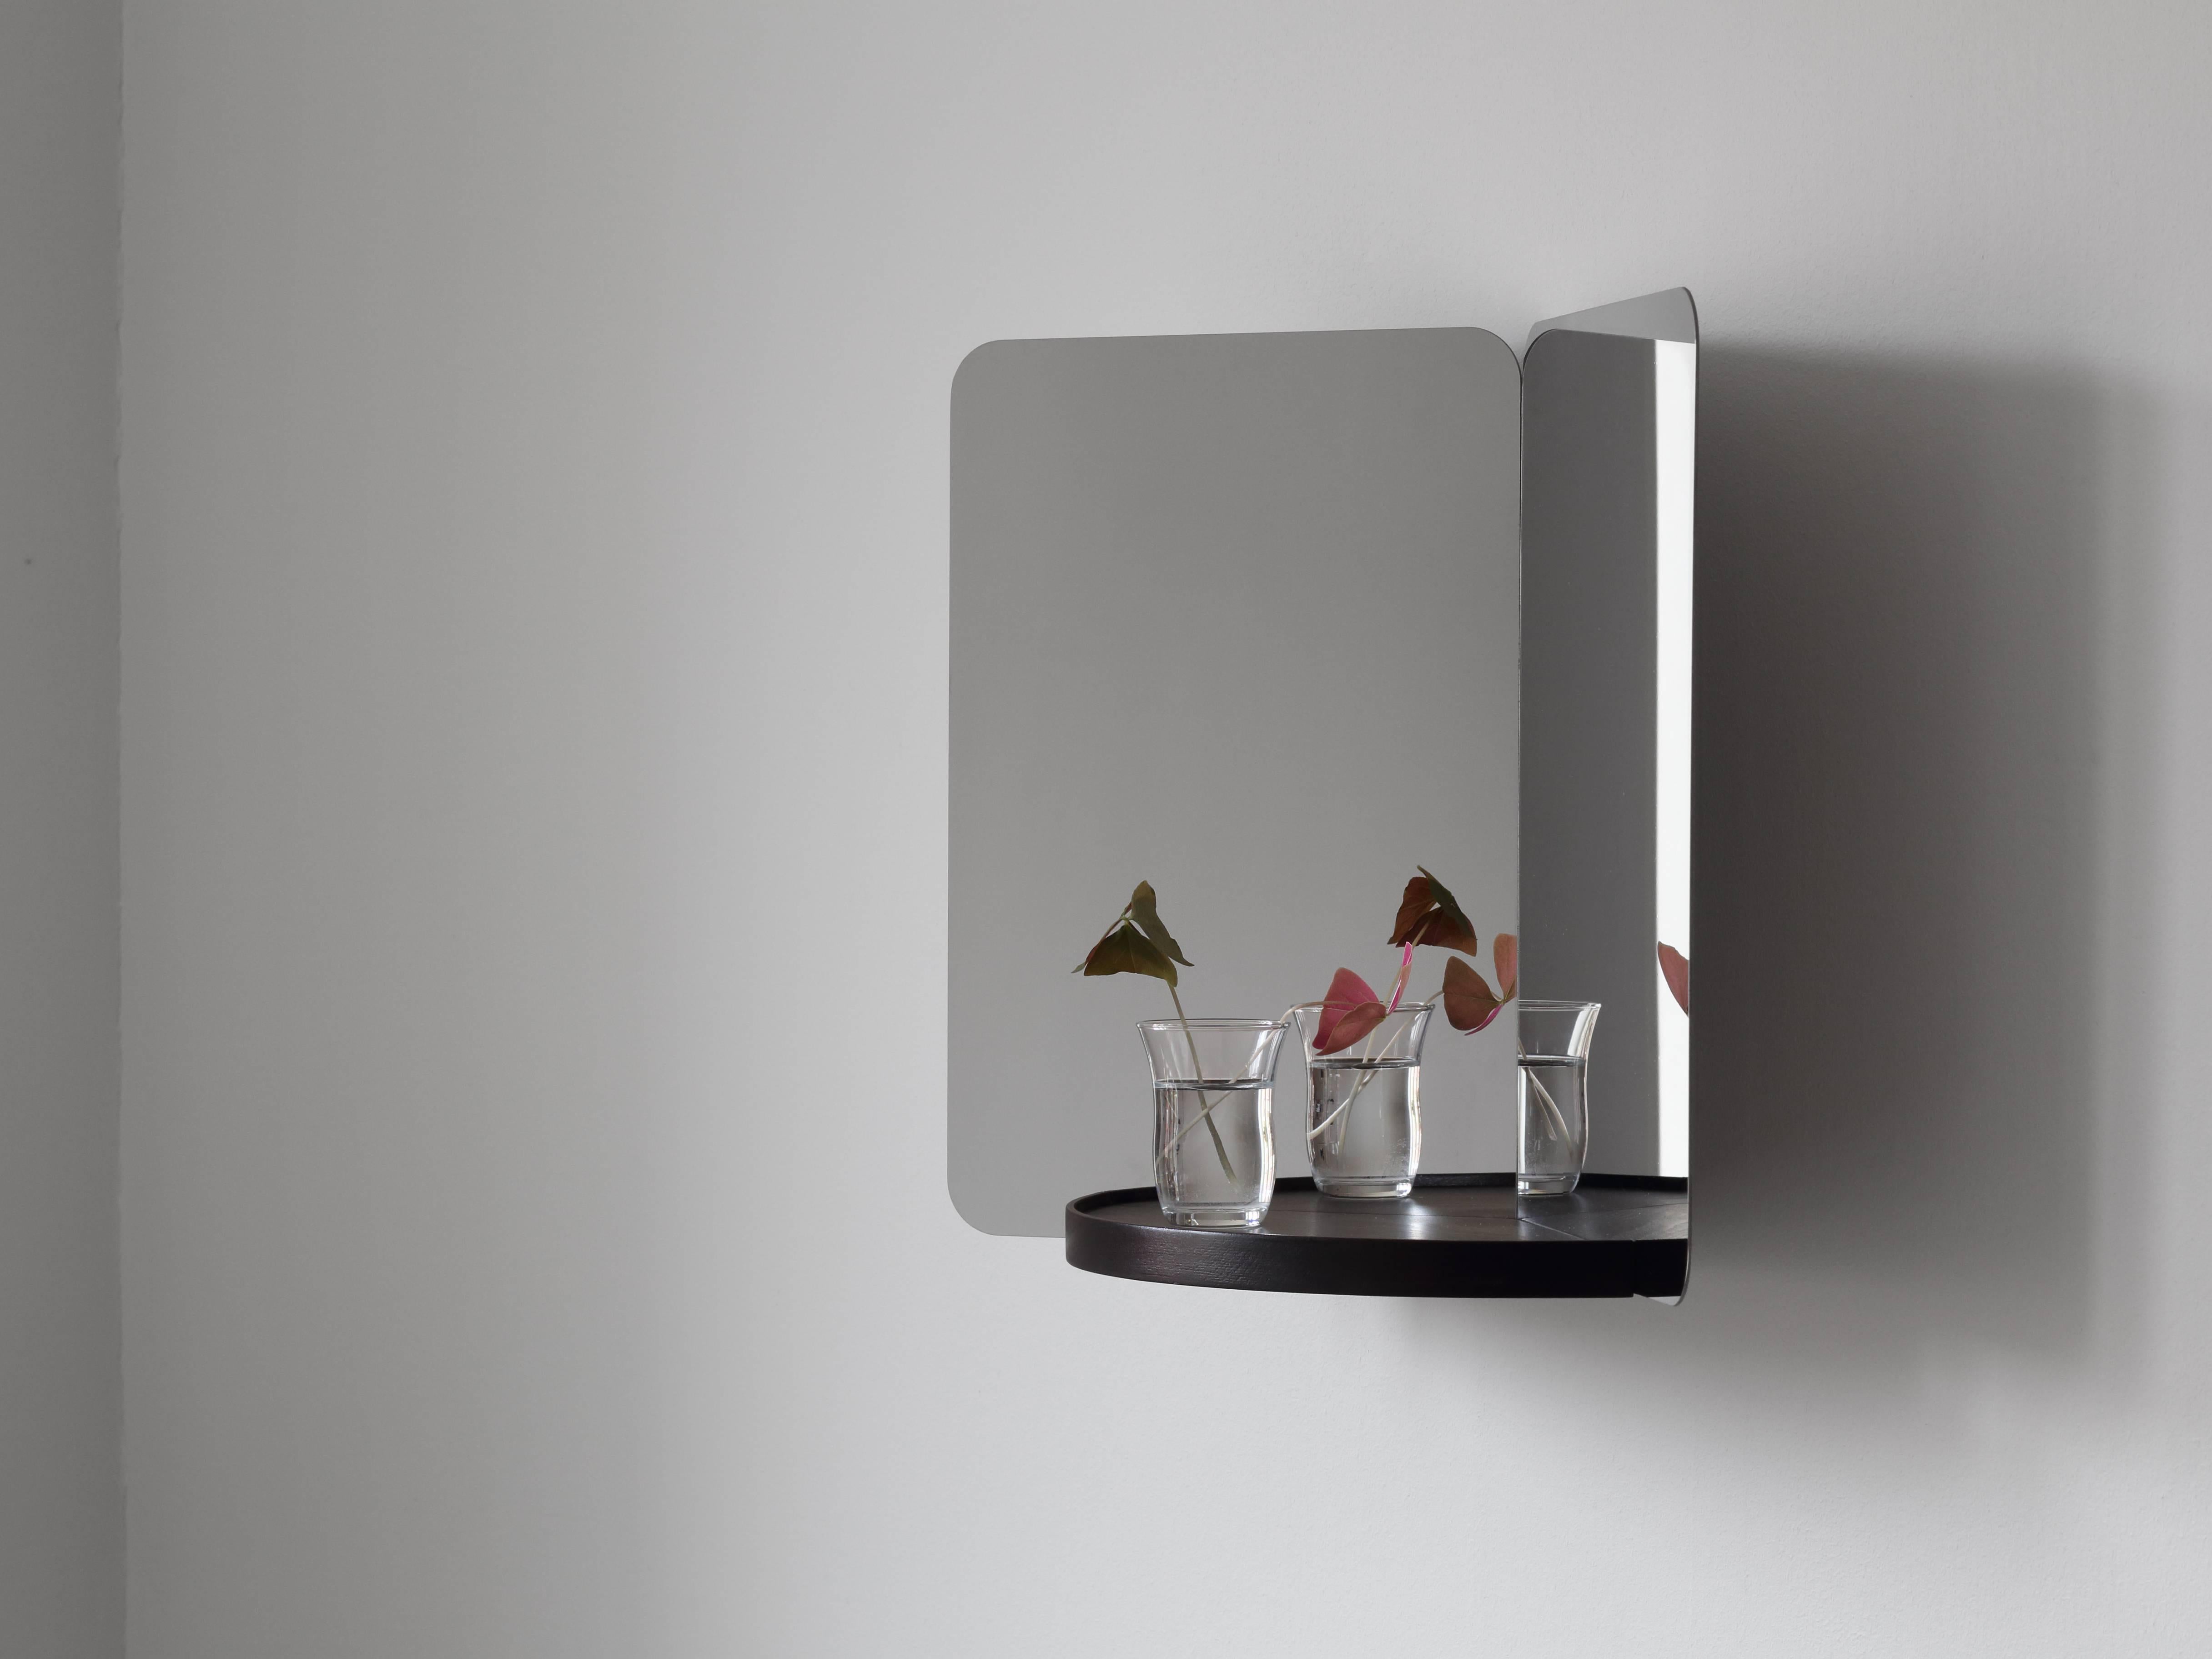 As part of Artek's first collaboration with Daniel Rybakken, the Norwegian designer created the 124° collection consisting of four mirrors available in three different sizes. Based on the designer's extensive research on the representation of